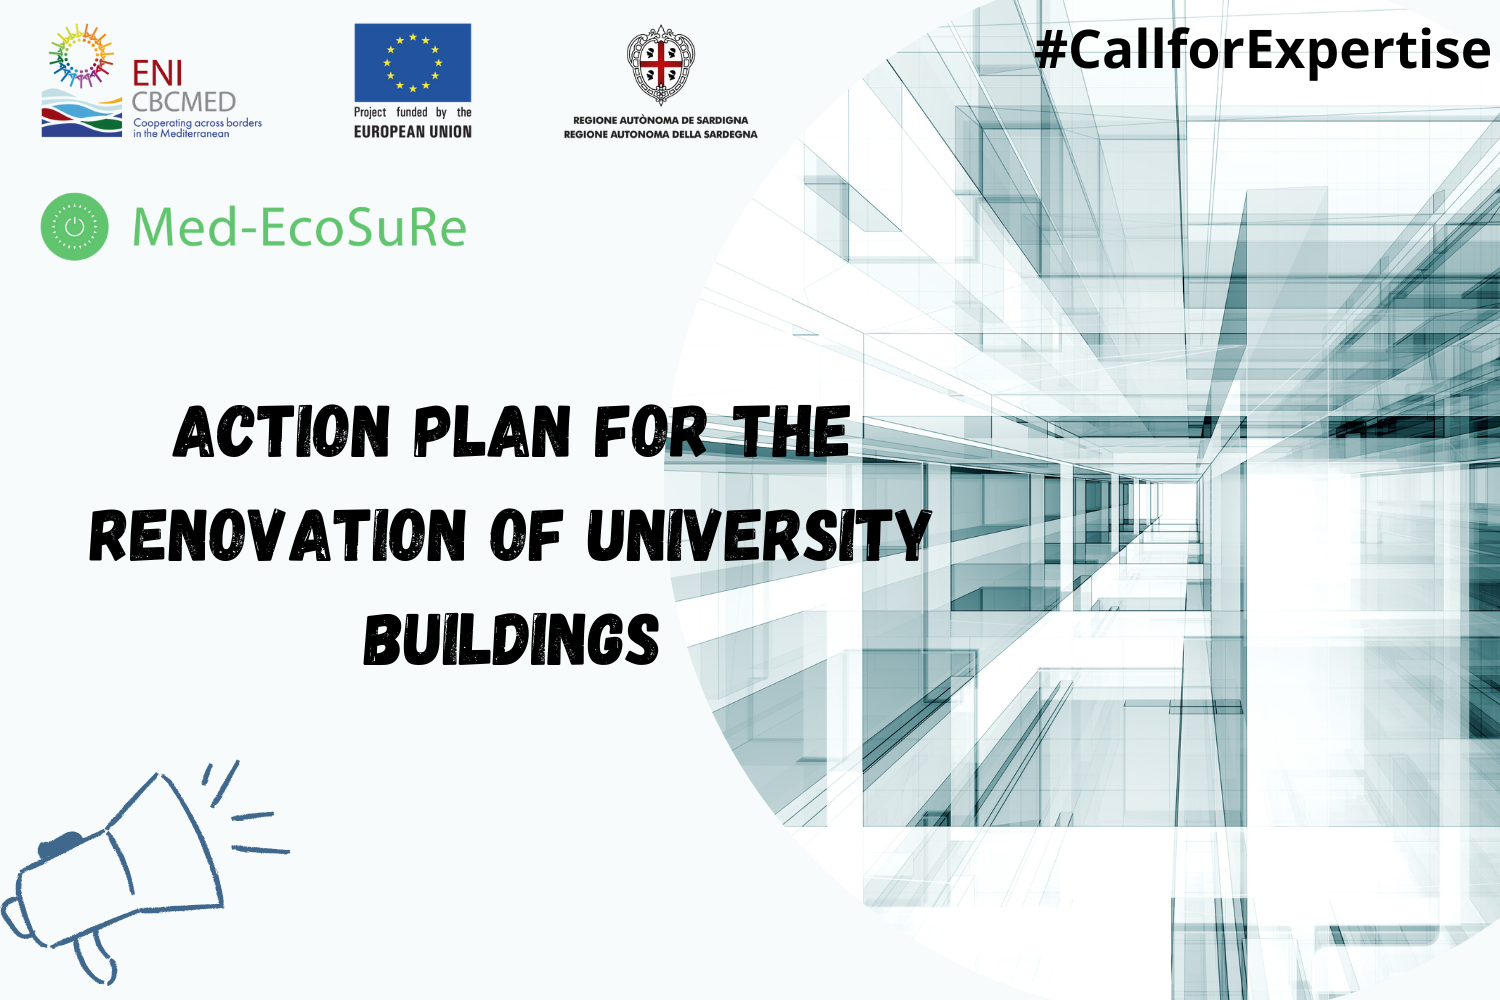 Med-EcoSuRe launches a call for expertise to elaborate an action plan for university buildings renovation in Tunisia